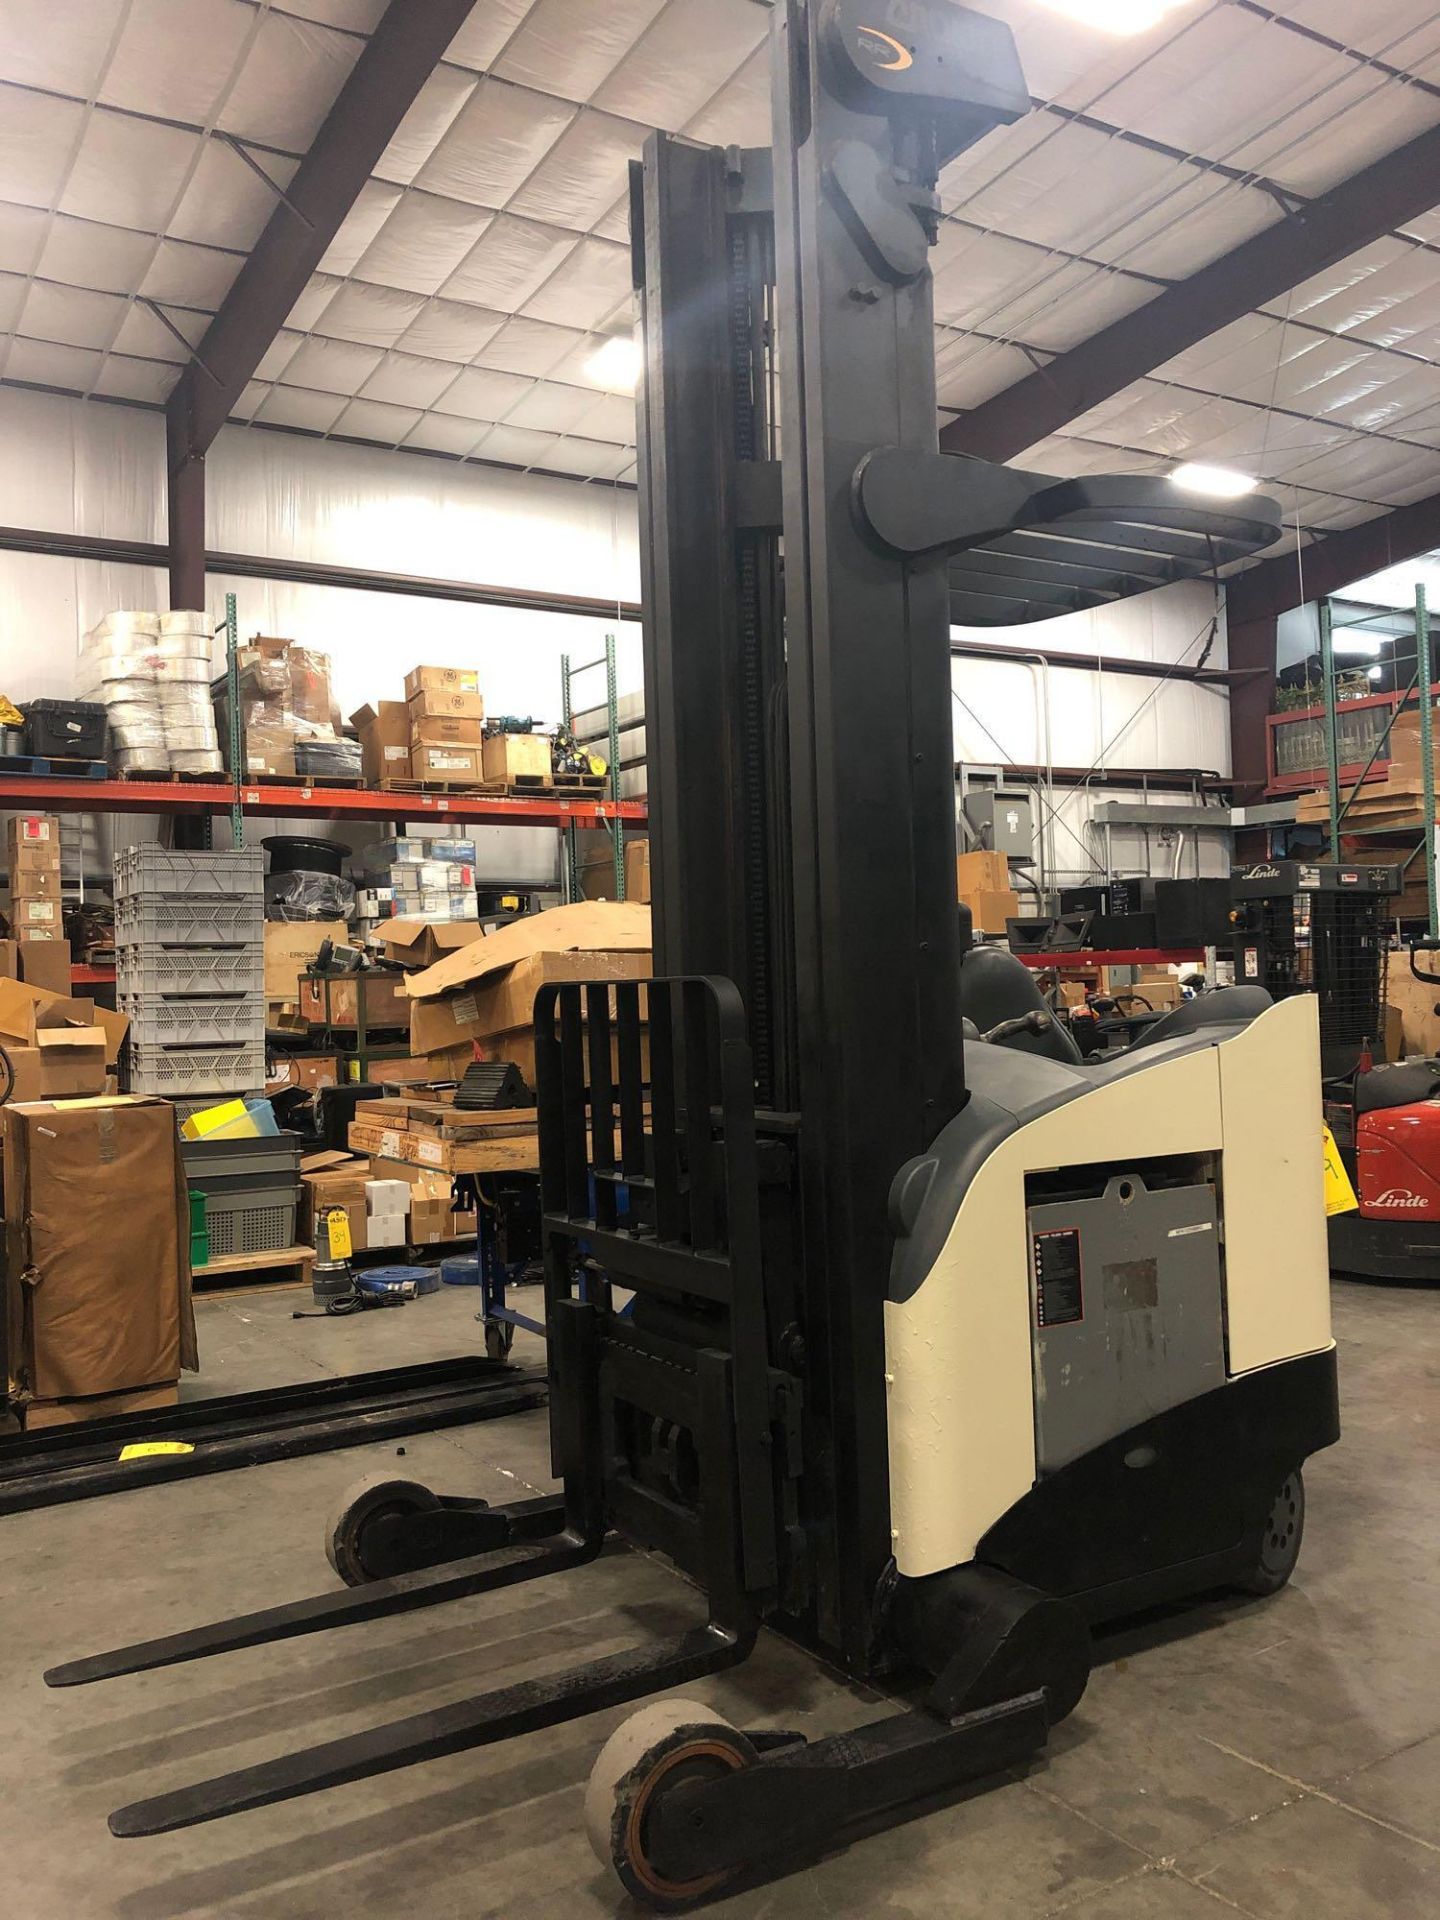 CROWN ELECTRIC REACH FORKLIFT MODEL RR5220-45 RR 5200 SERIES, APPROX. 5,000 LB CAPACITY, 300" HEIGHT - Image 3 of 8